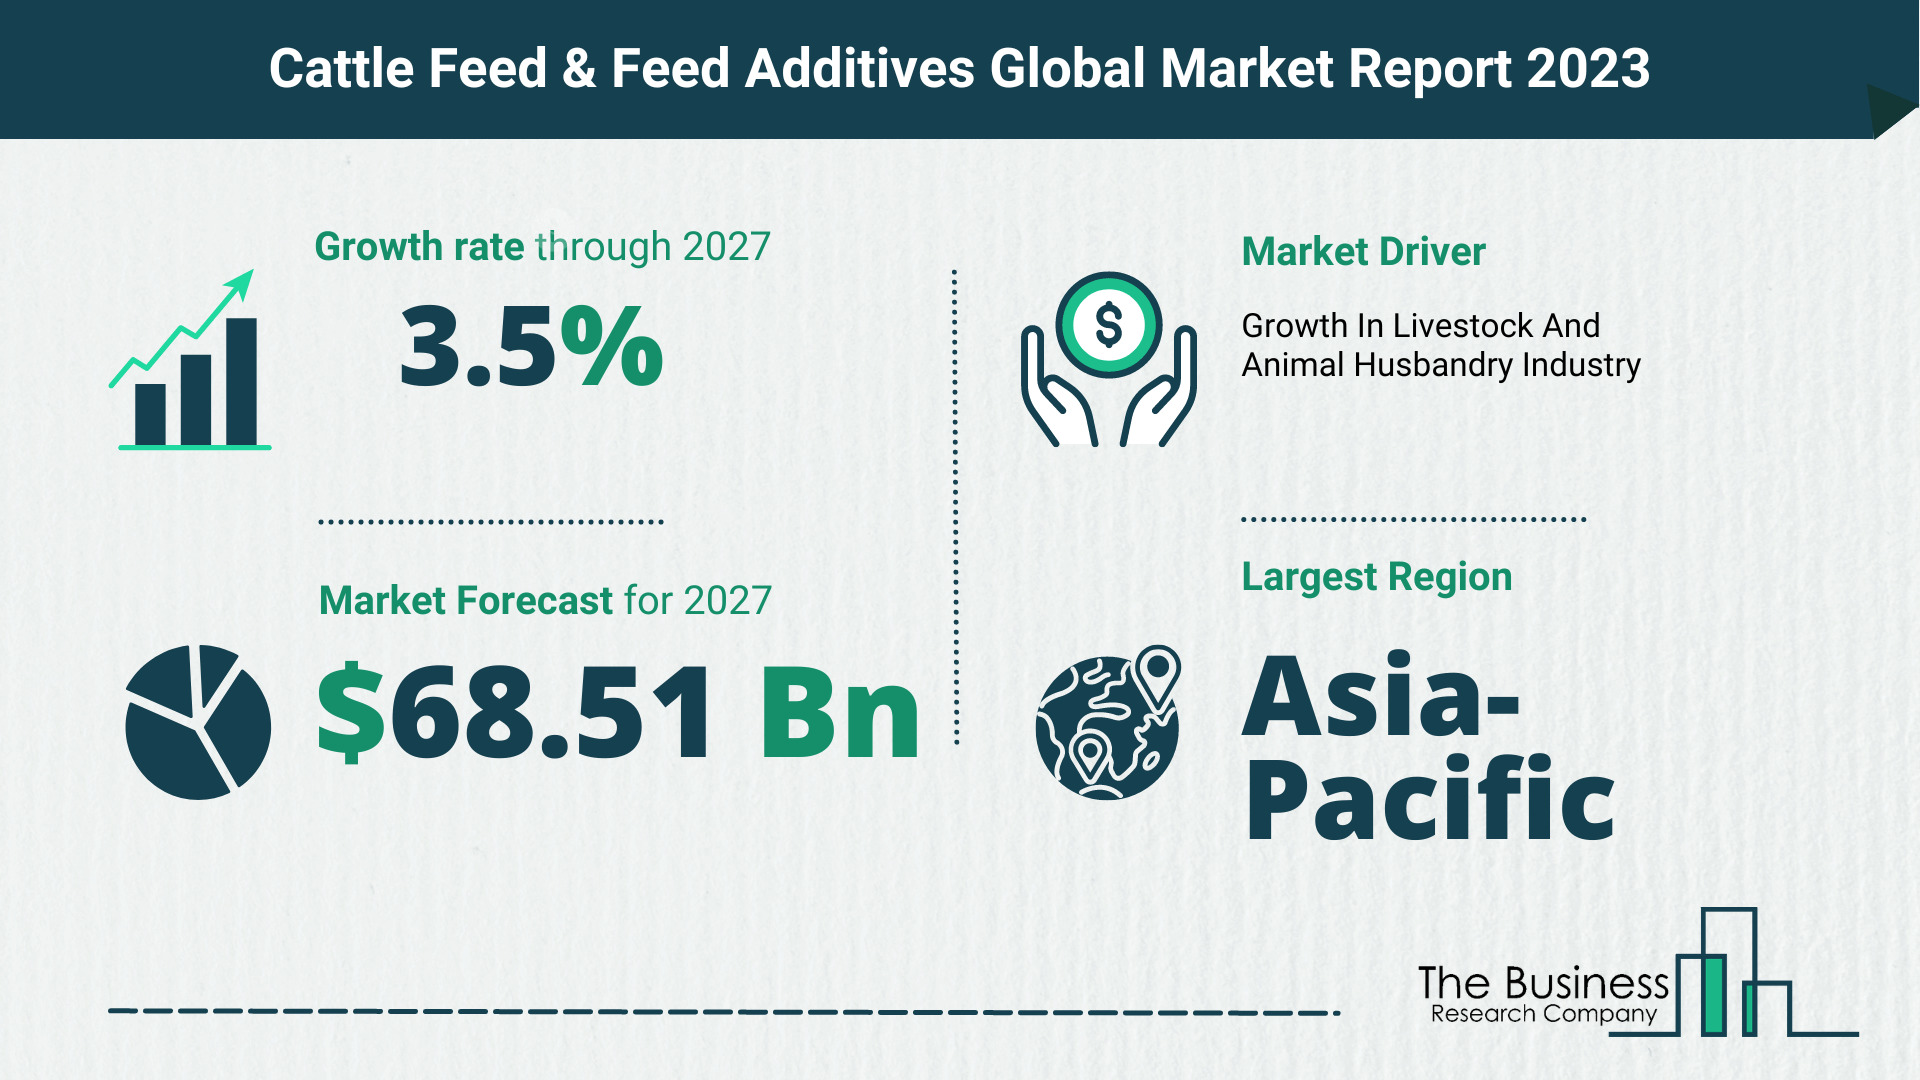 Cattle Feed & Feed Additives Market Size, Share, And Growth Rate Analysis 2023